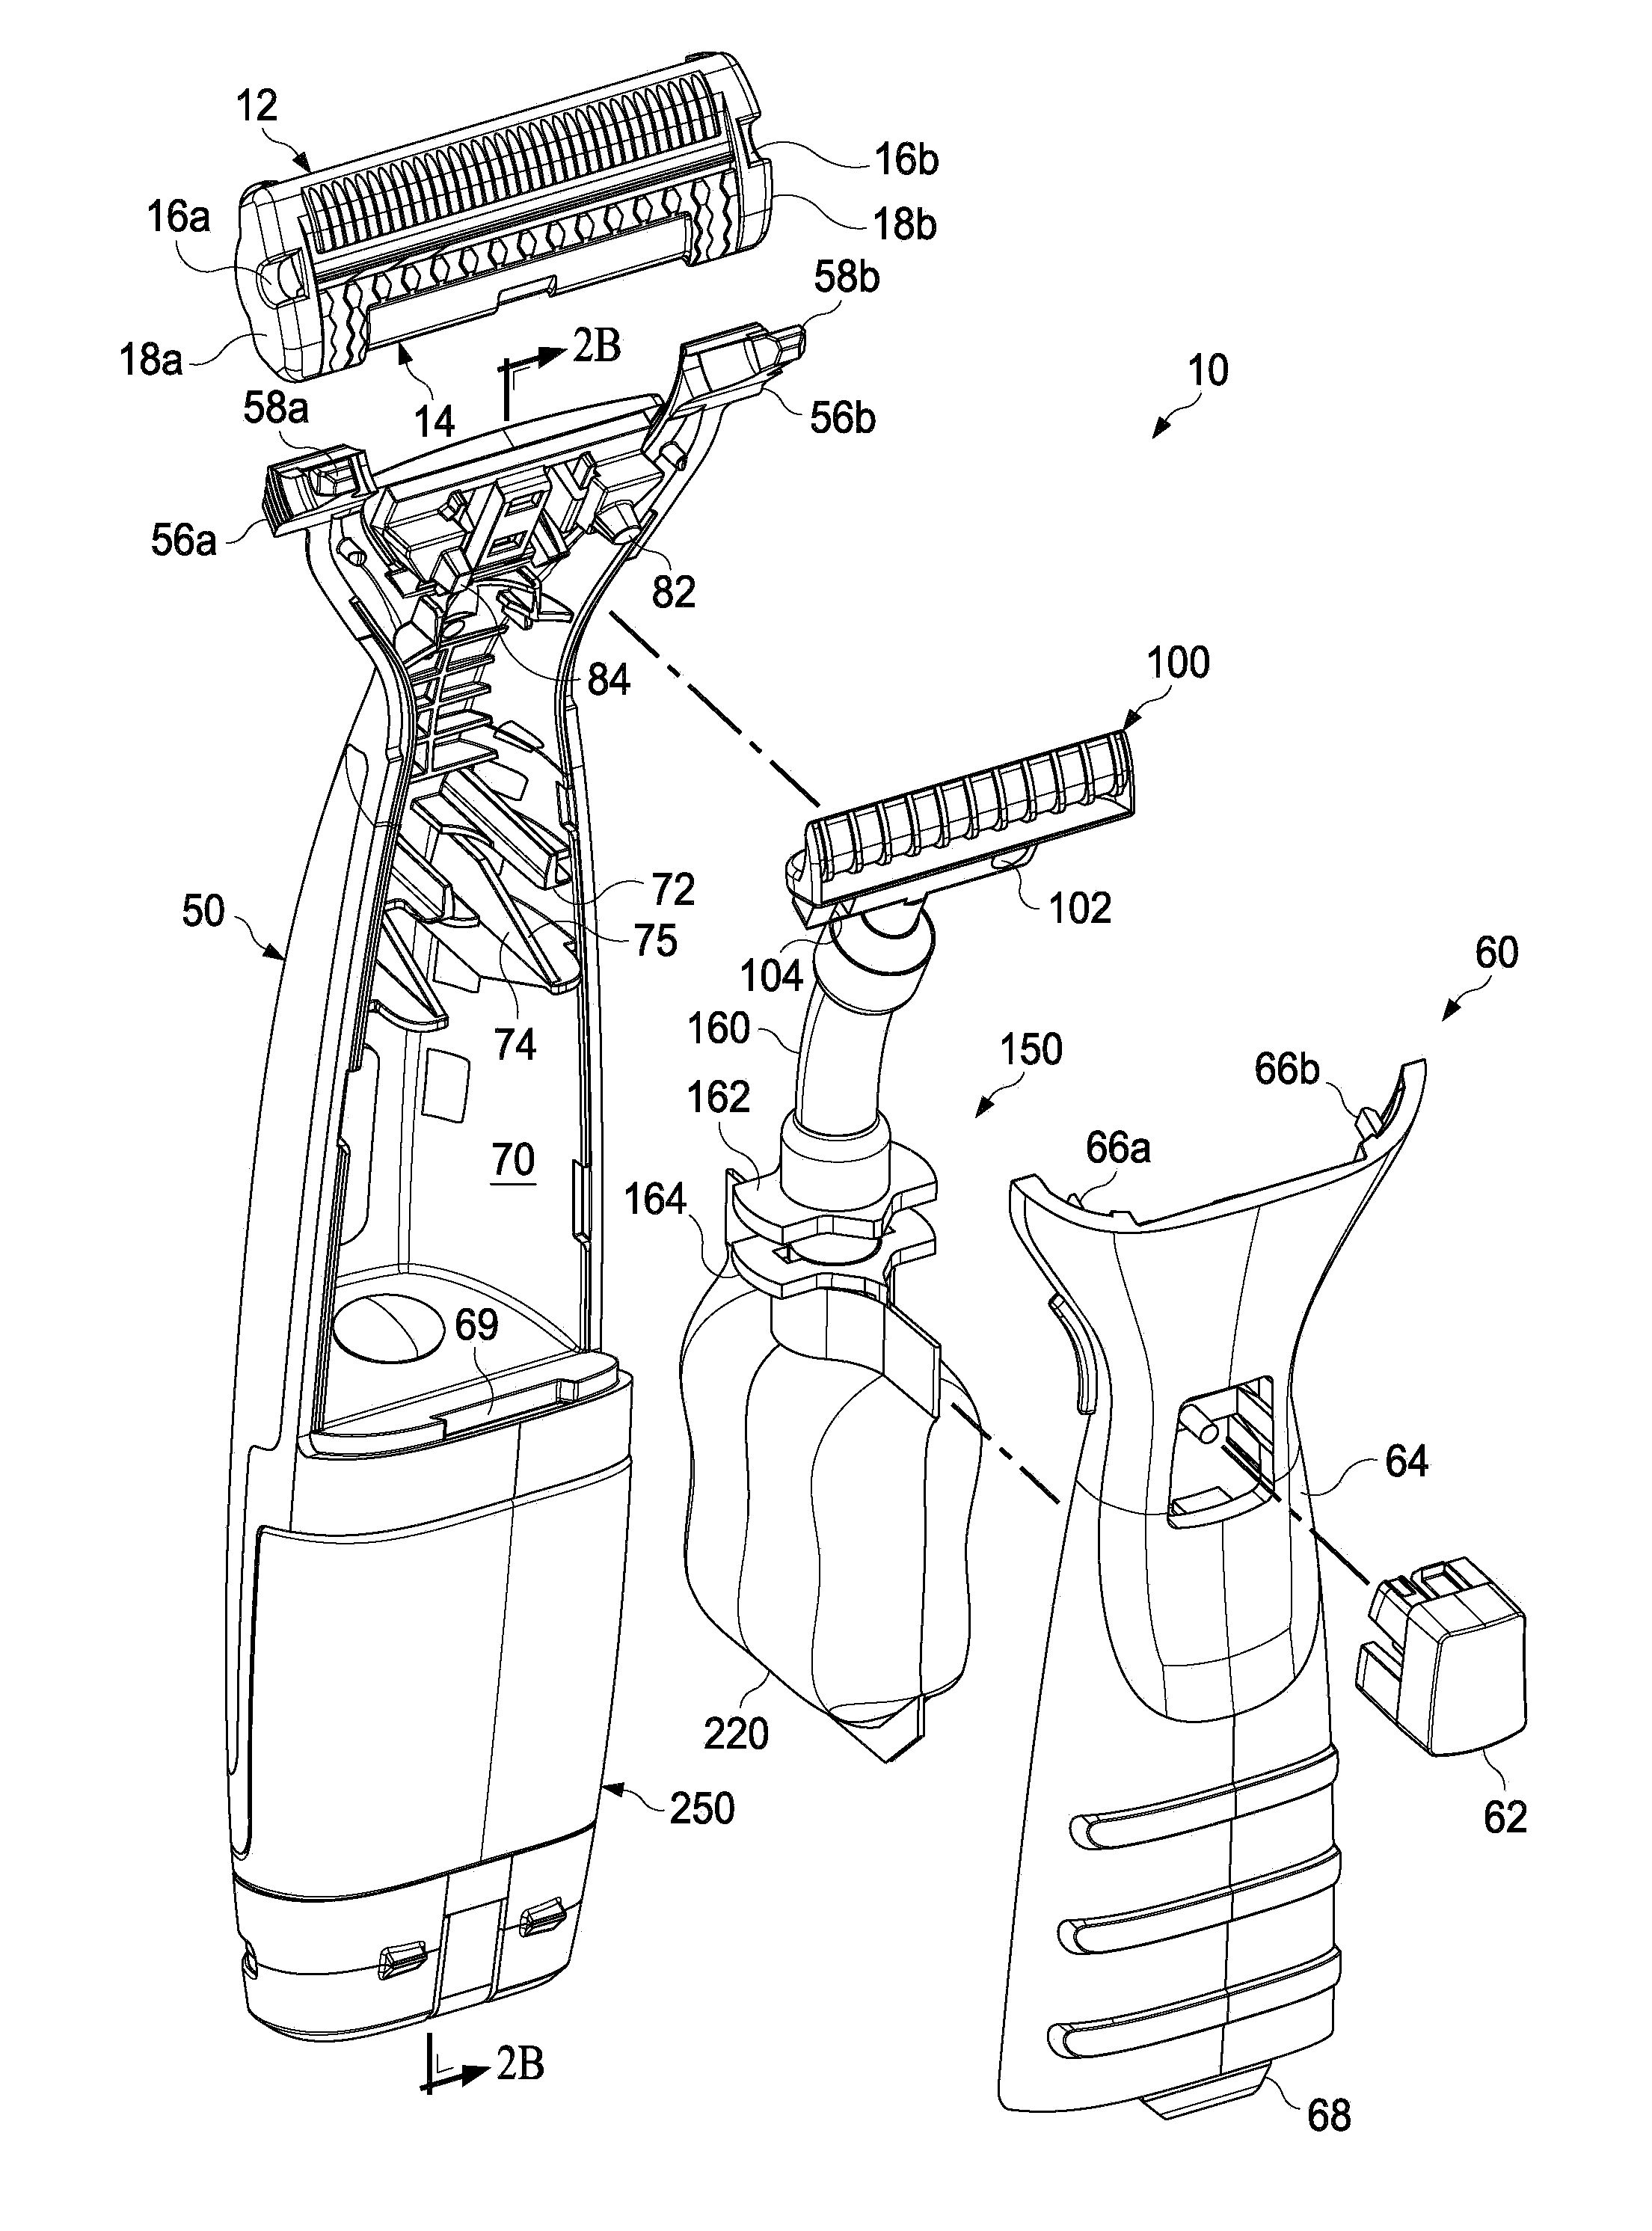 Hair removal device with cartridge retention cover